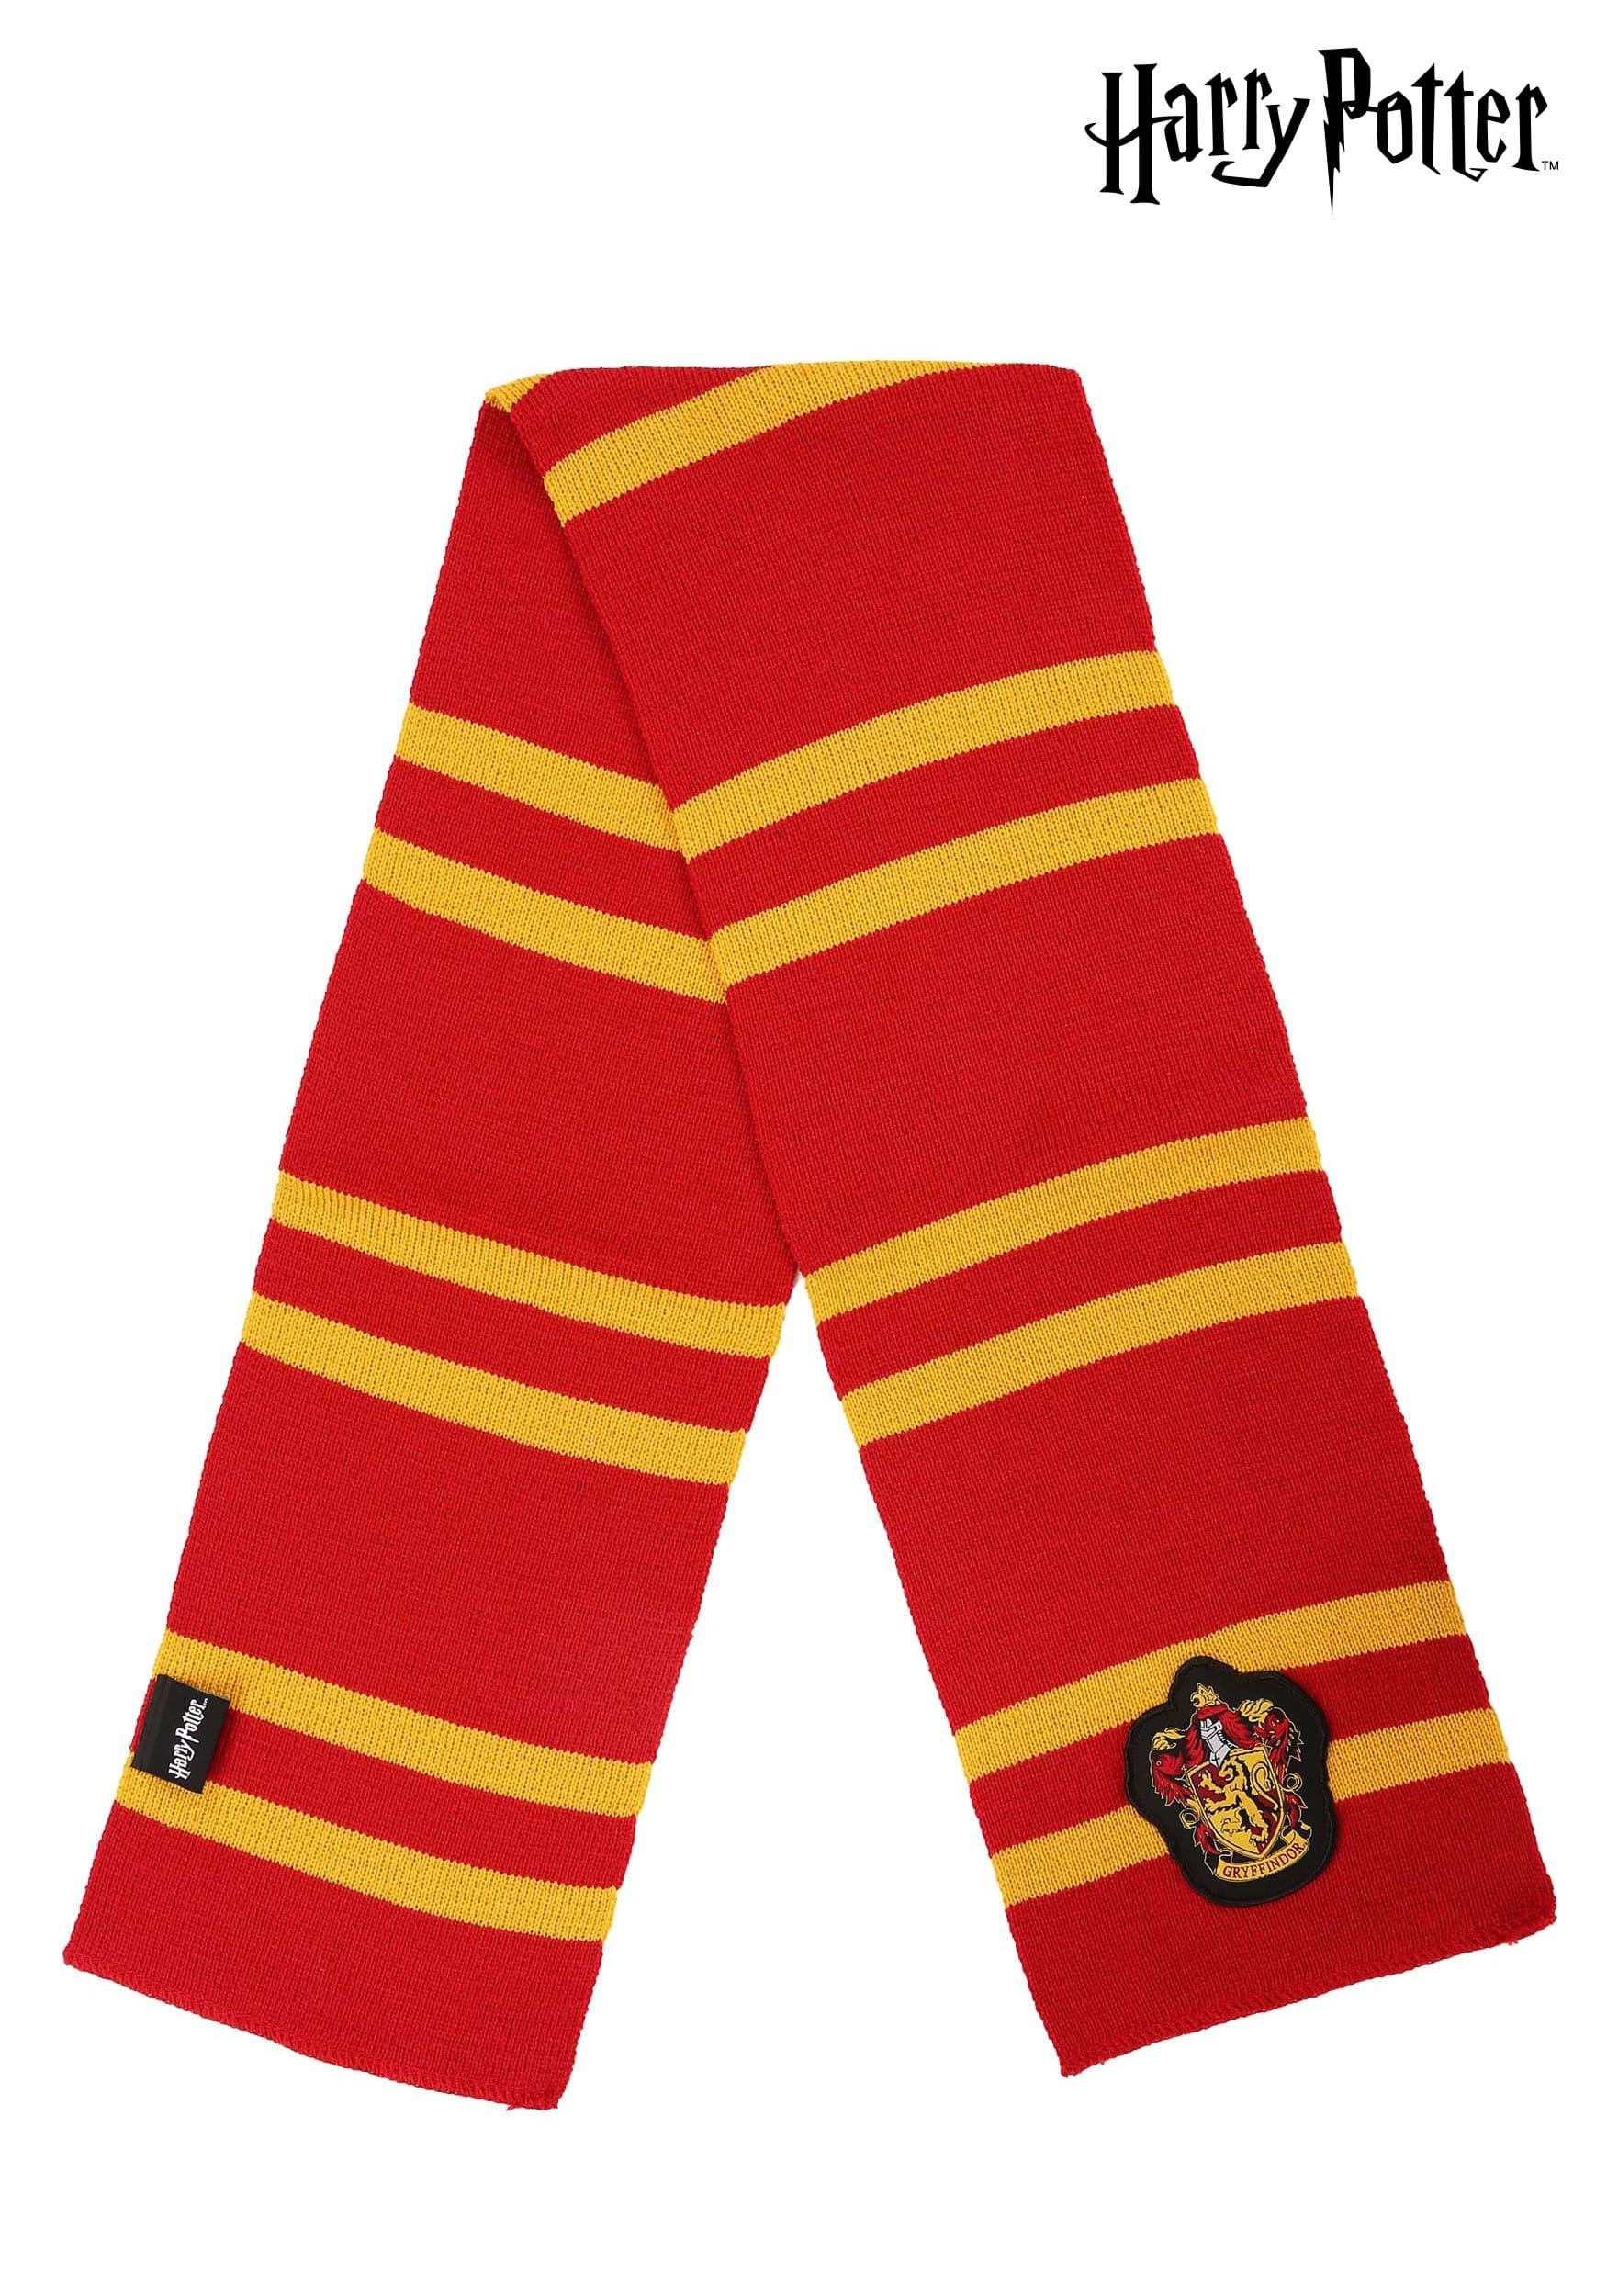 Harry Potter Deluxe Gryffindor Knit Buff Multicolor